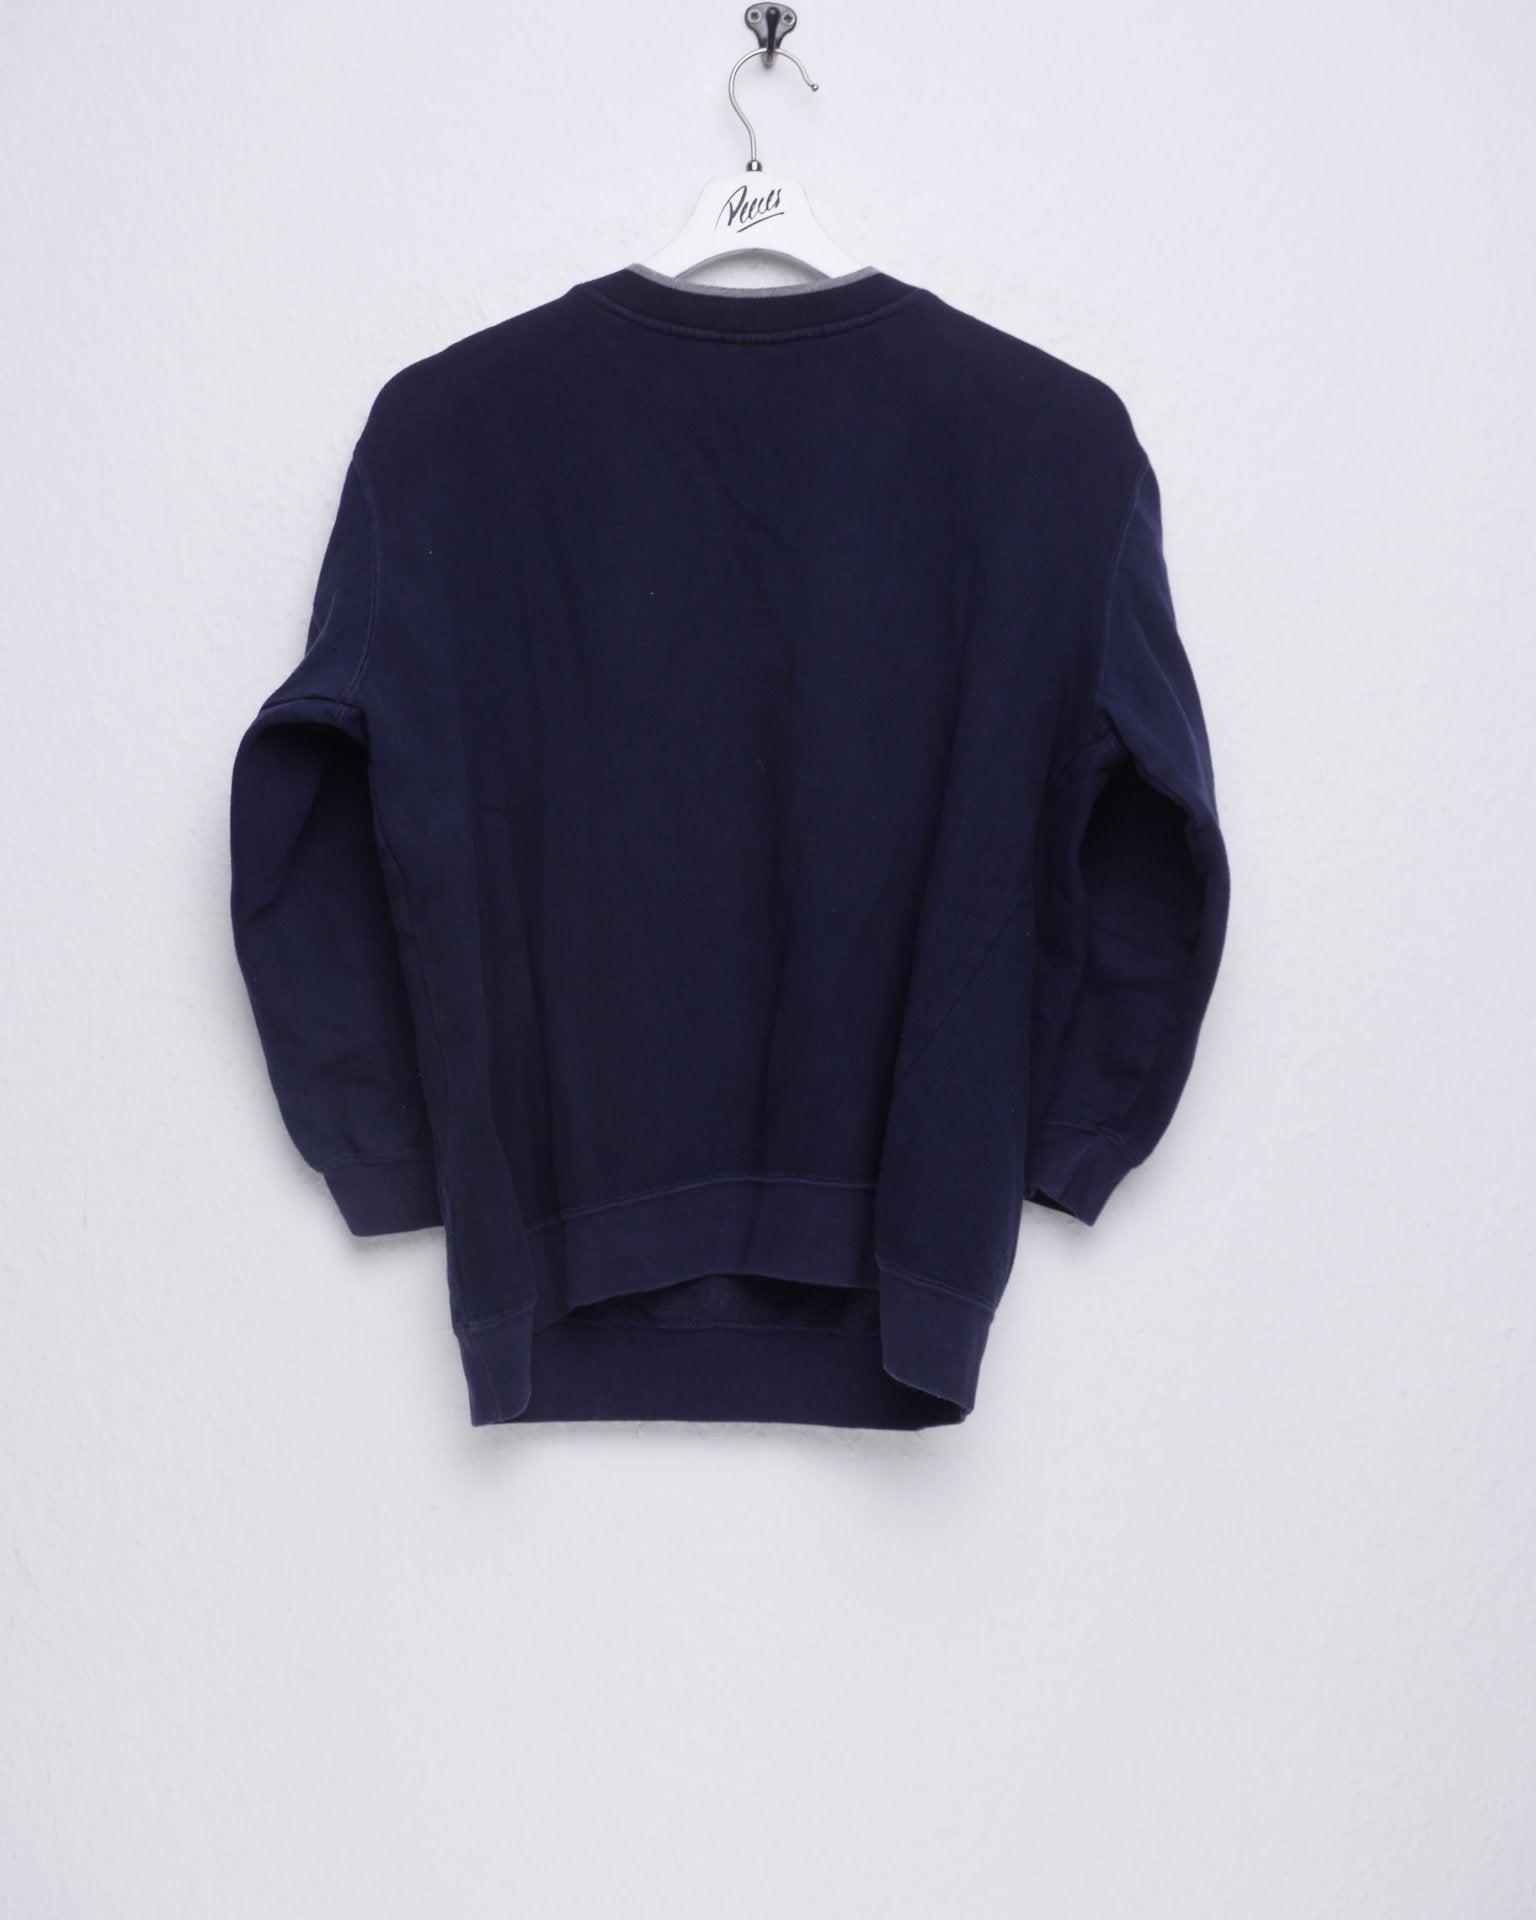 Marvin the Martian embroidered Spellout navy Sweater - Peeces